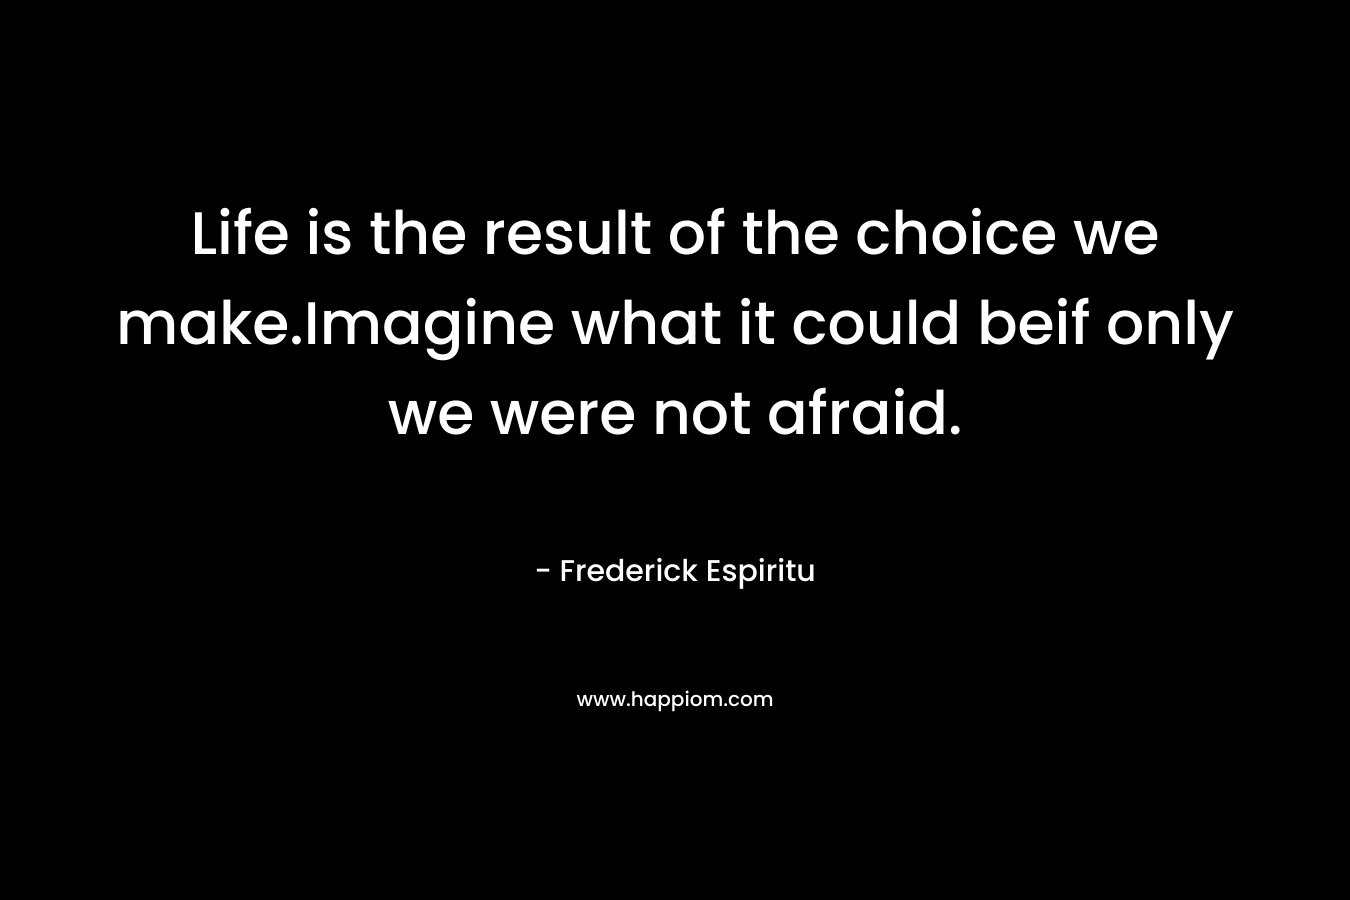 Life is the result of the choice we make.Imagine what it could beif only we were not afraid. – Frederick Espiritu